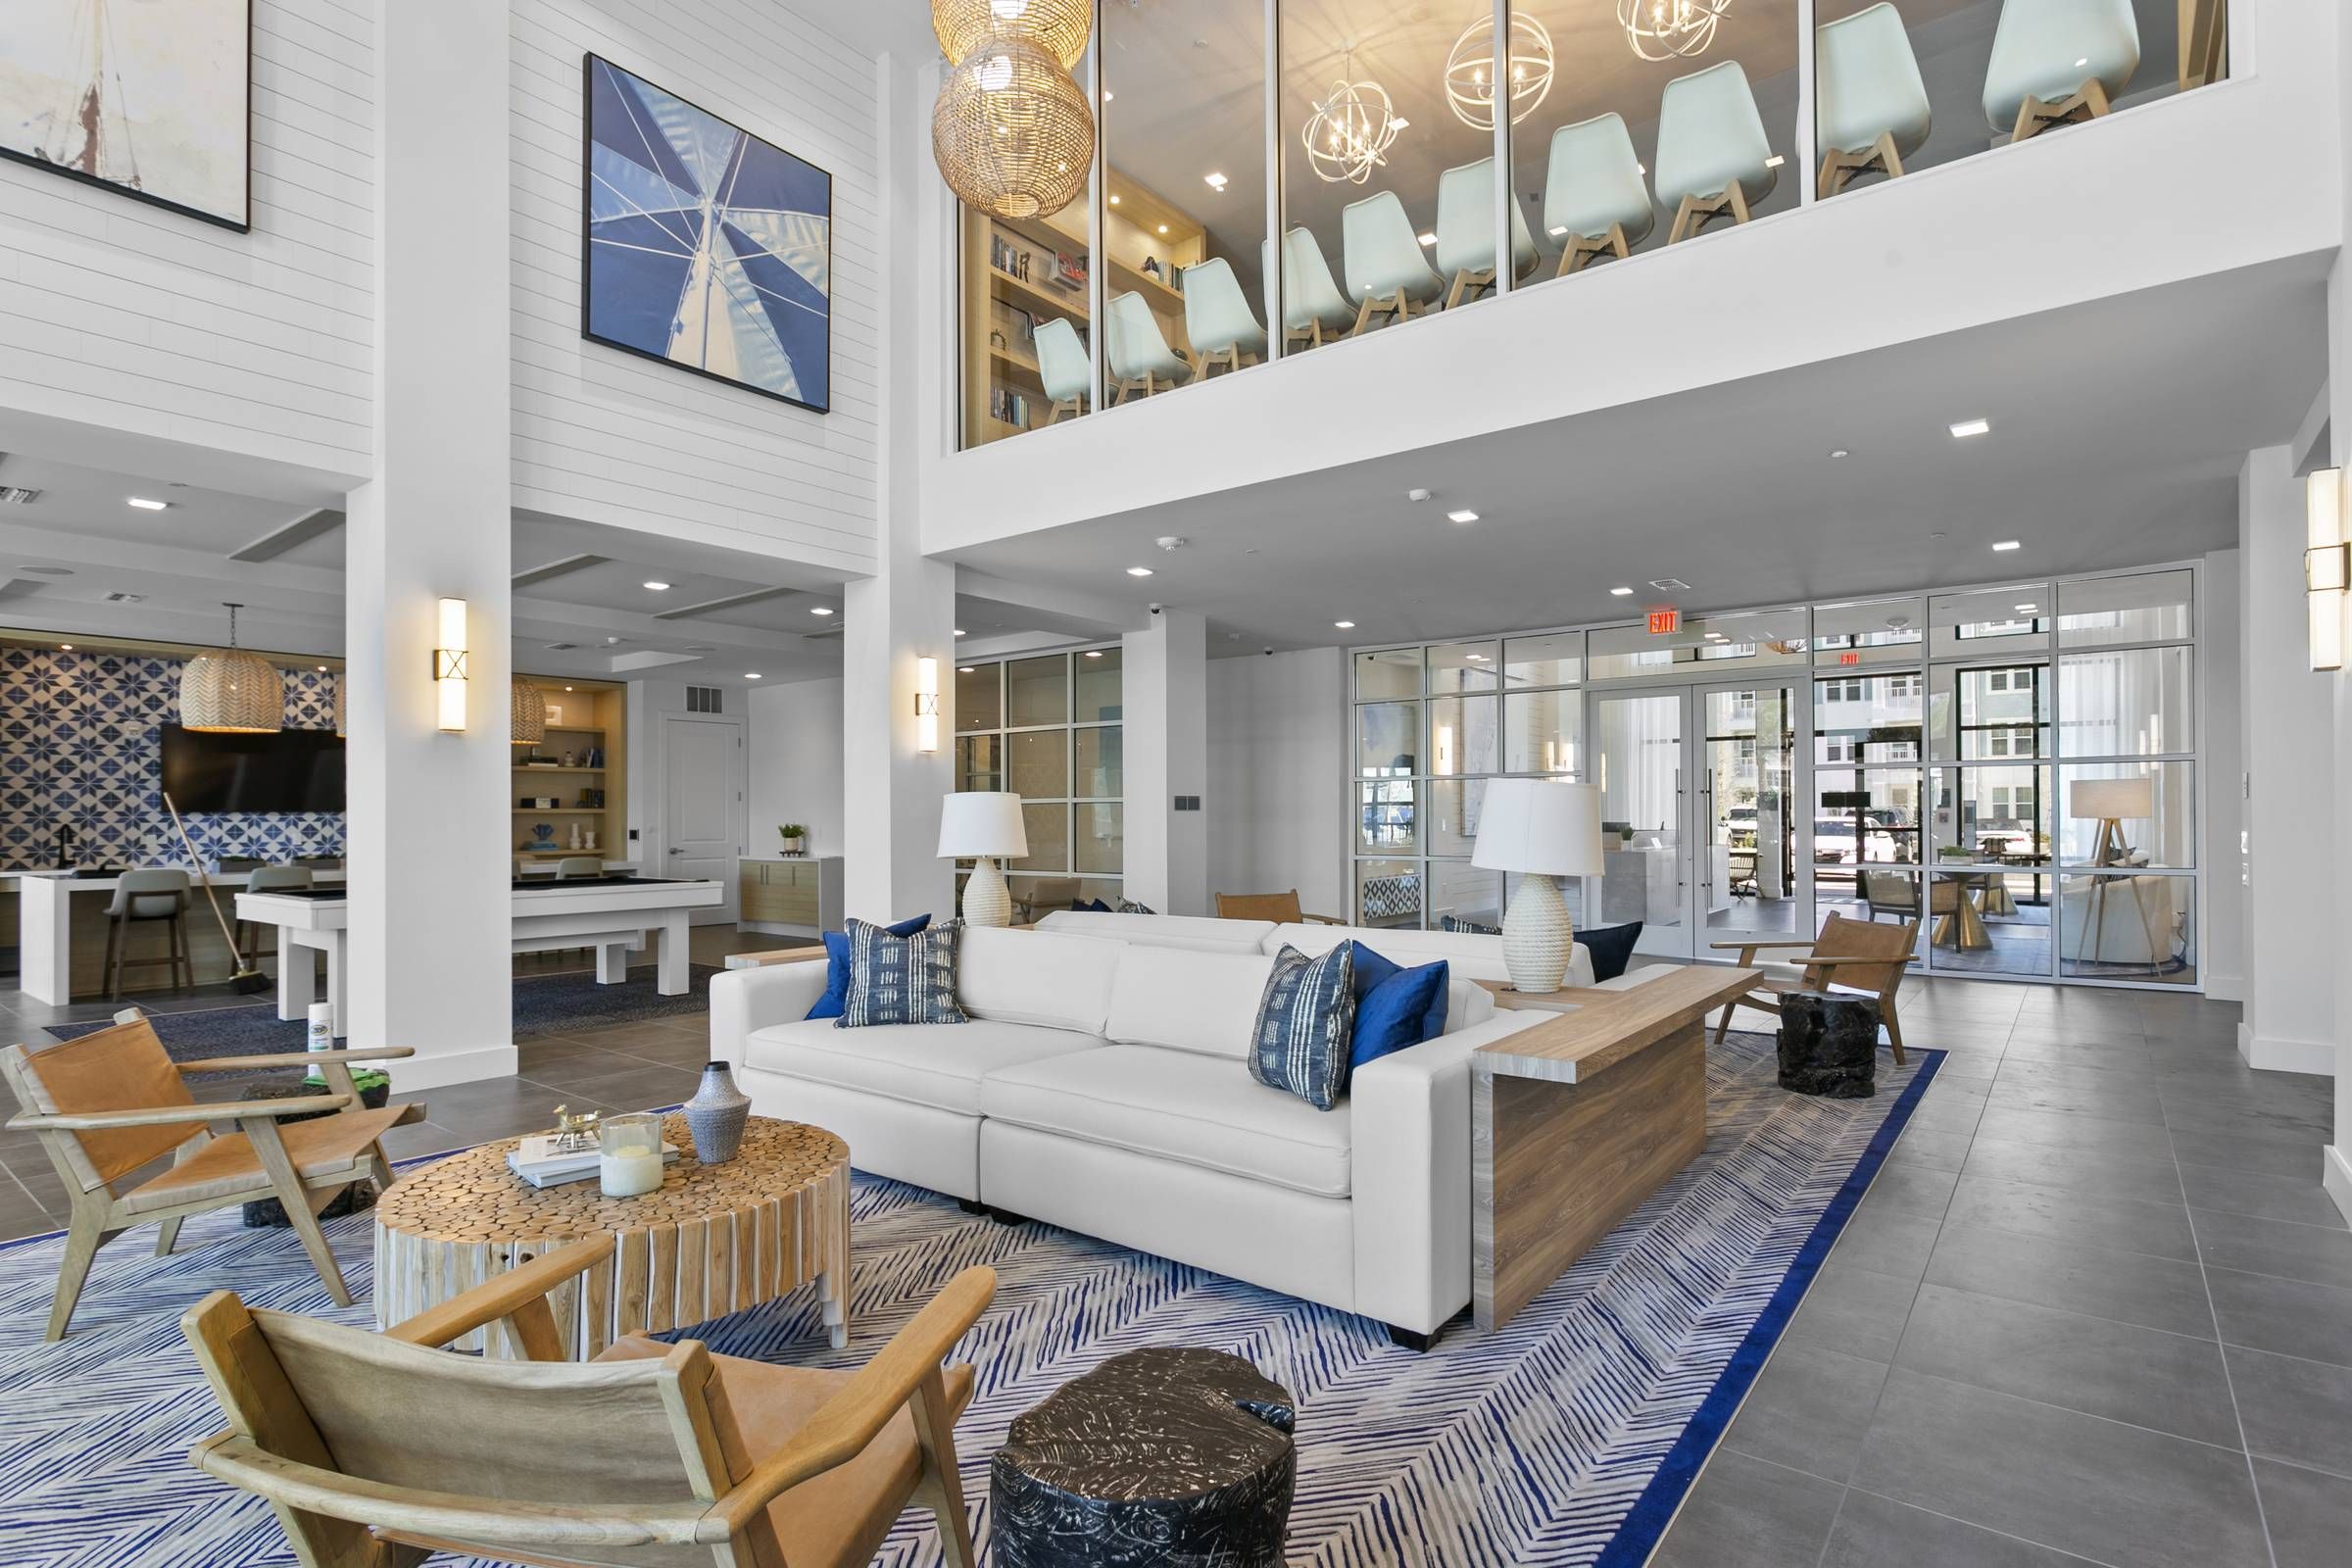 Alta Belleair's luxurious club room exudes comfort with its modern furnishings, vibrant blue accents, and an open-concept kitchen in the background.